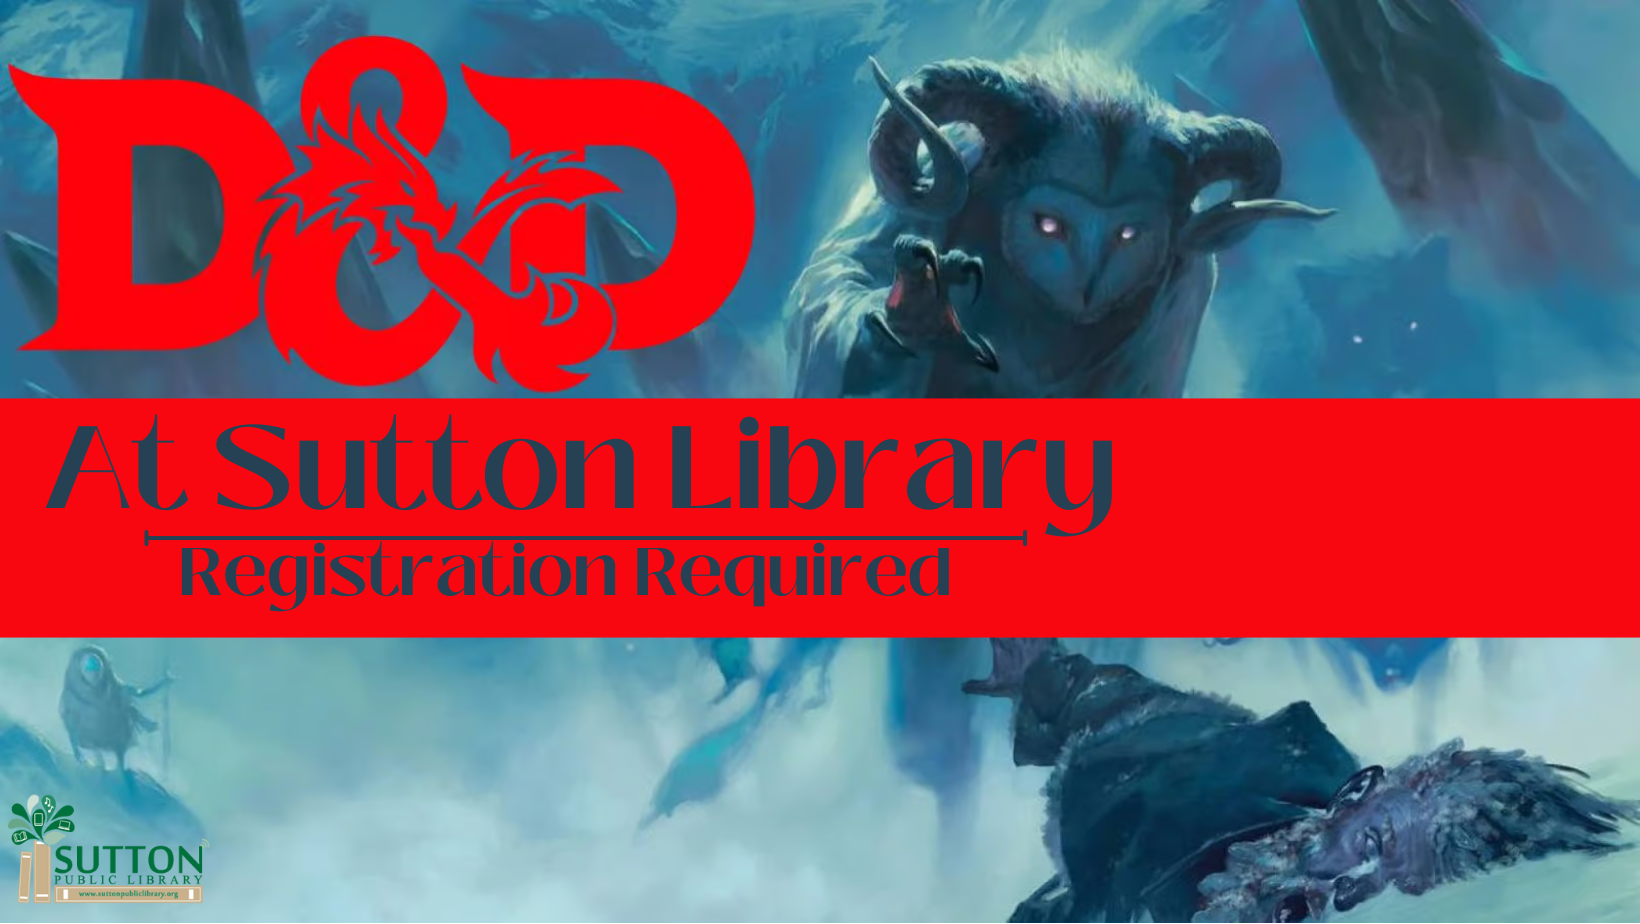 Dungeons ad dragons at Sutton Library Registration required